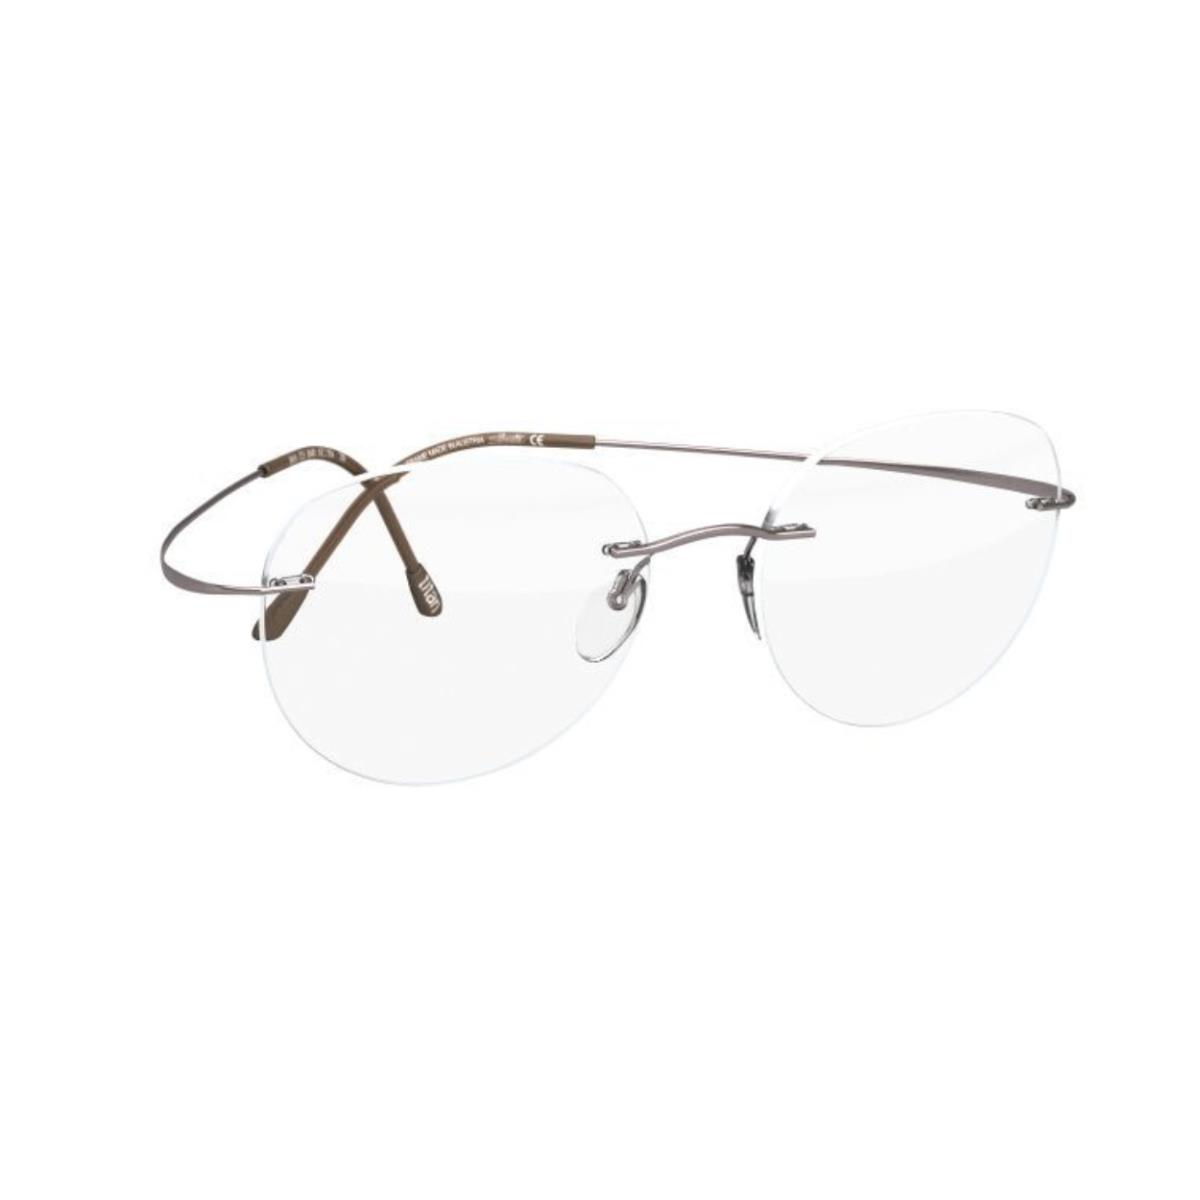 Silhouette 5515 Rimless Eyeglasses Titan Minimal Art The Must Collection Frames SILVER GREY - 7110, SIZE: 48-18 150, SHAPE - CN